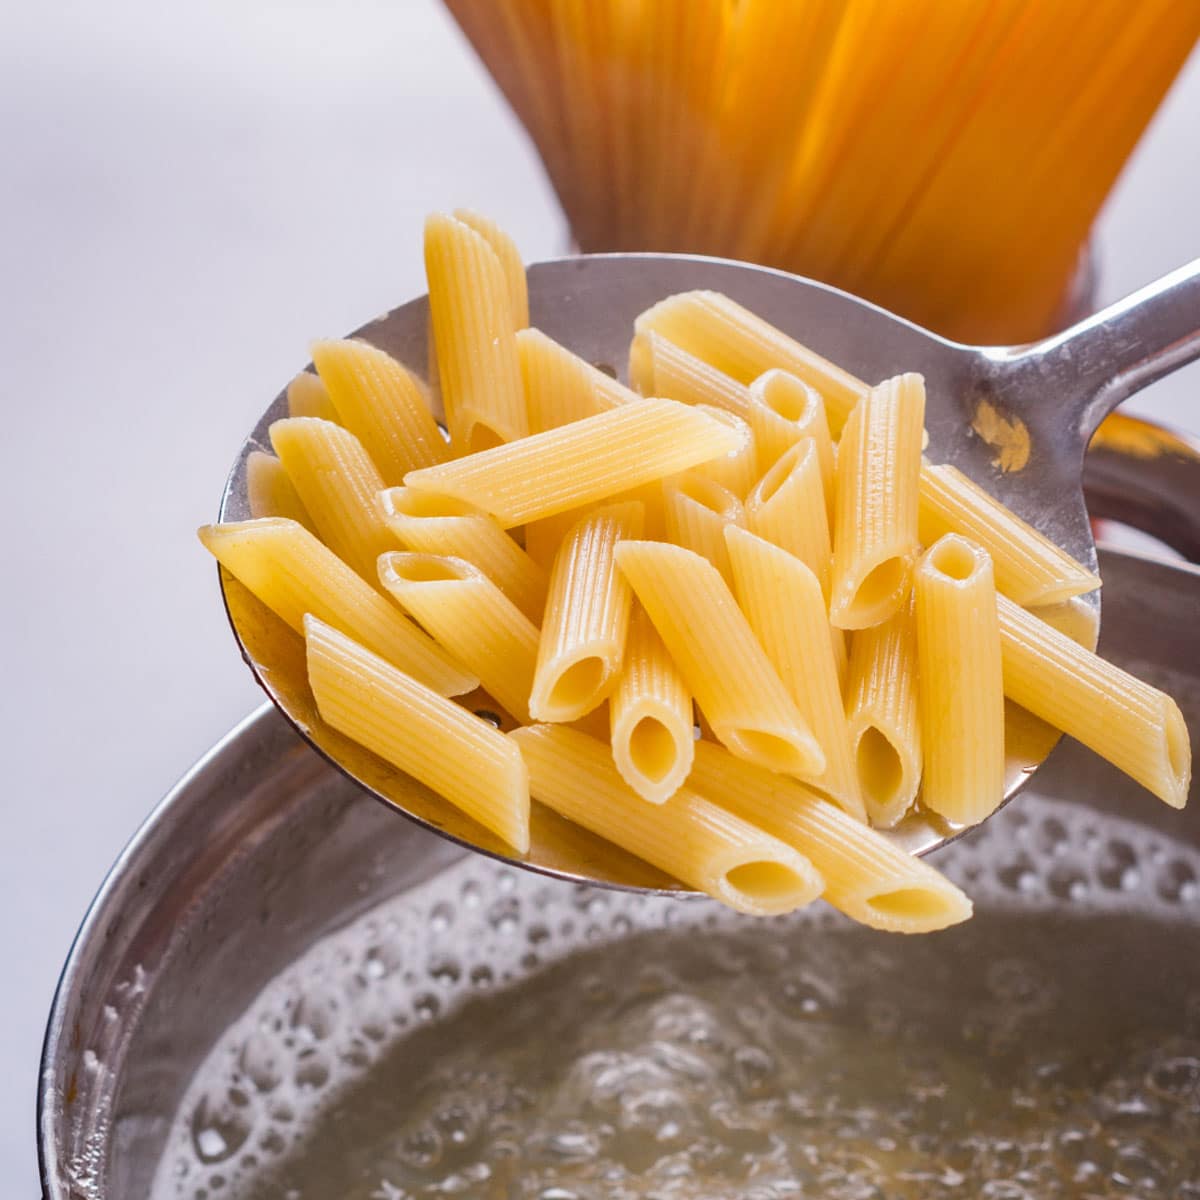 Ever wonder why your pasta is chewy and not silky smooth? It's a common problem for home cooks who haven't quite mastered the art of cooking pasta.